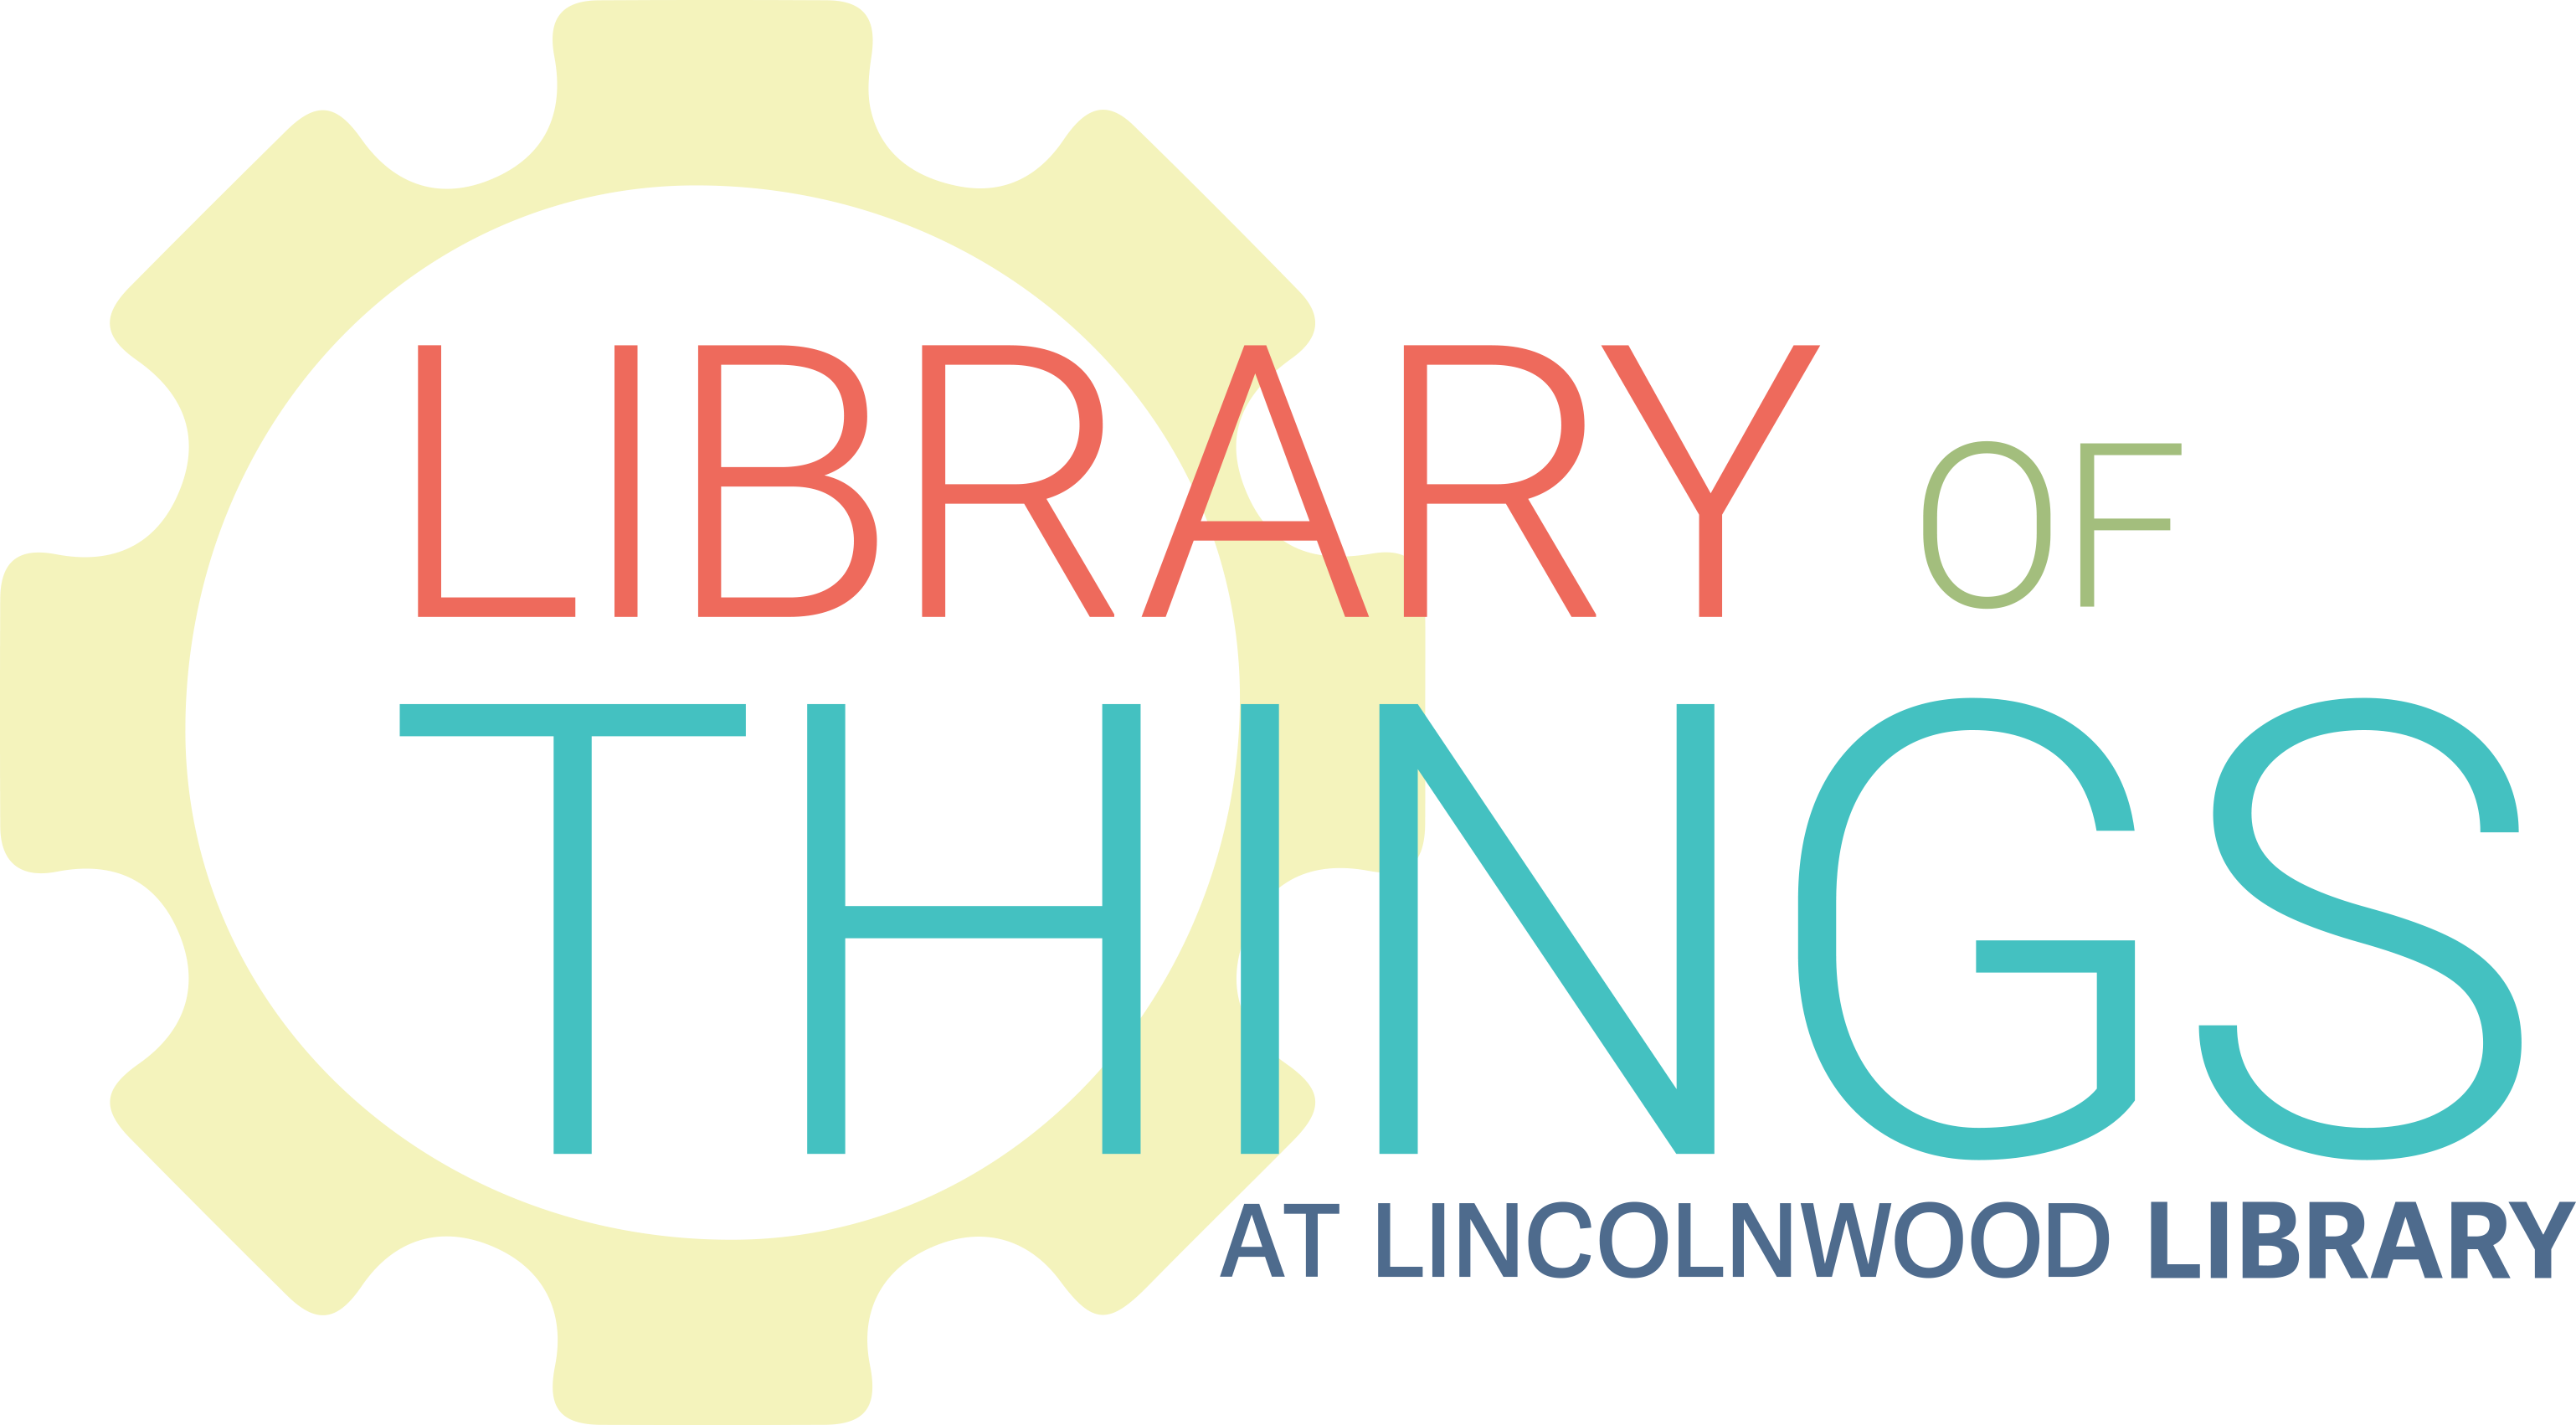 Library of Things at Lincolnwood Library gear logo